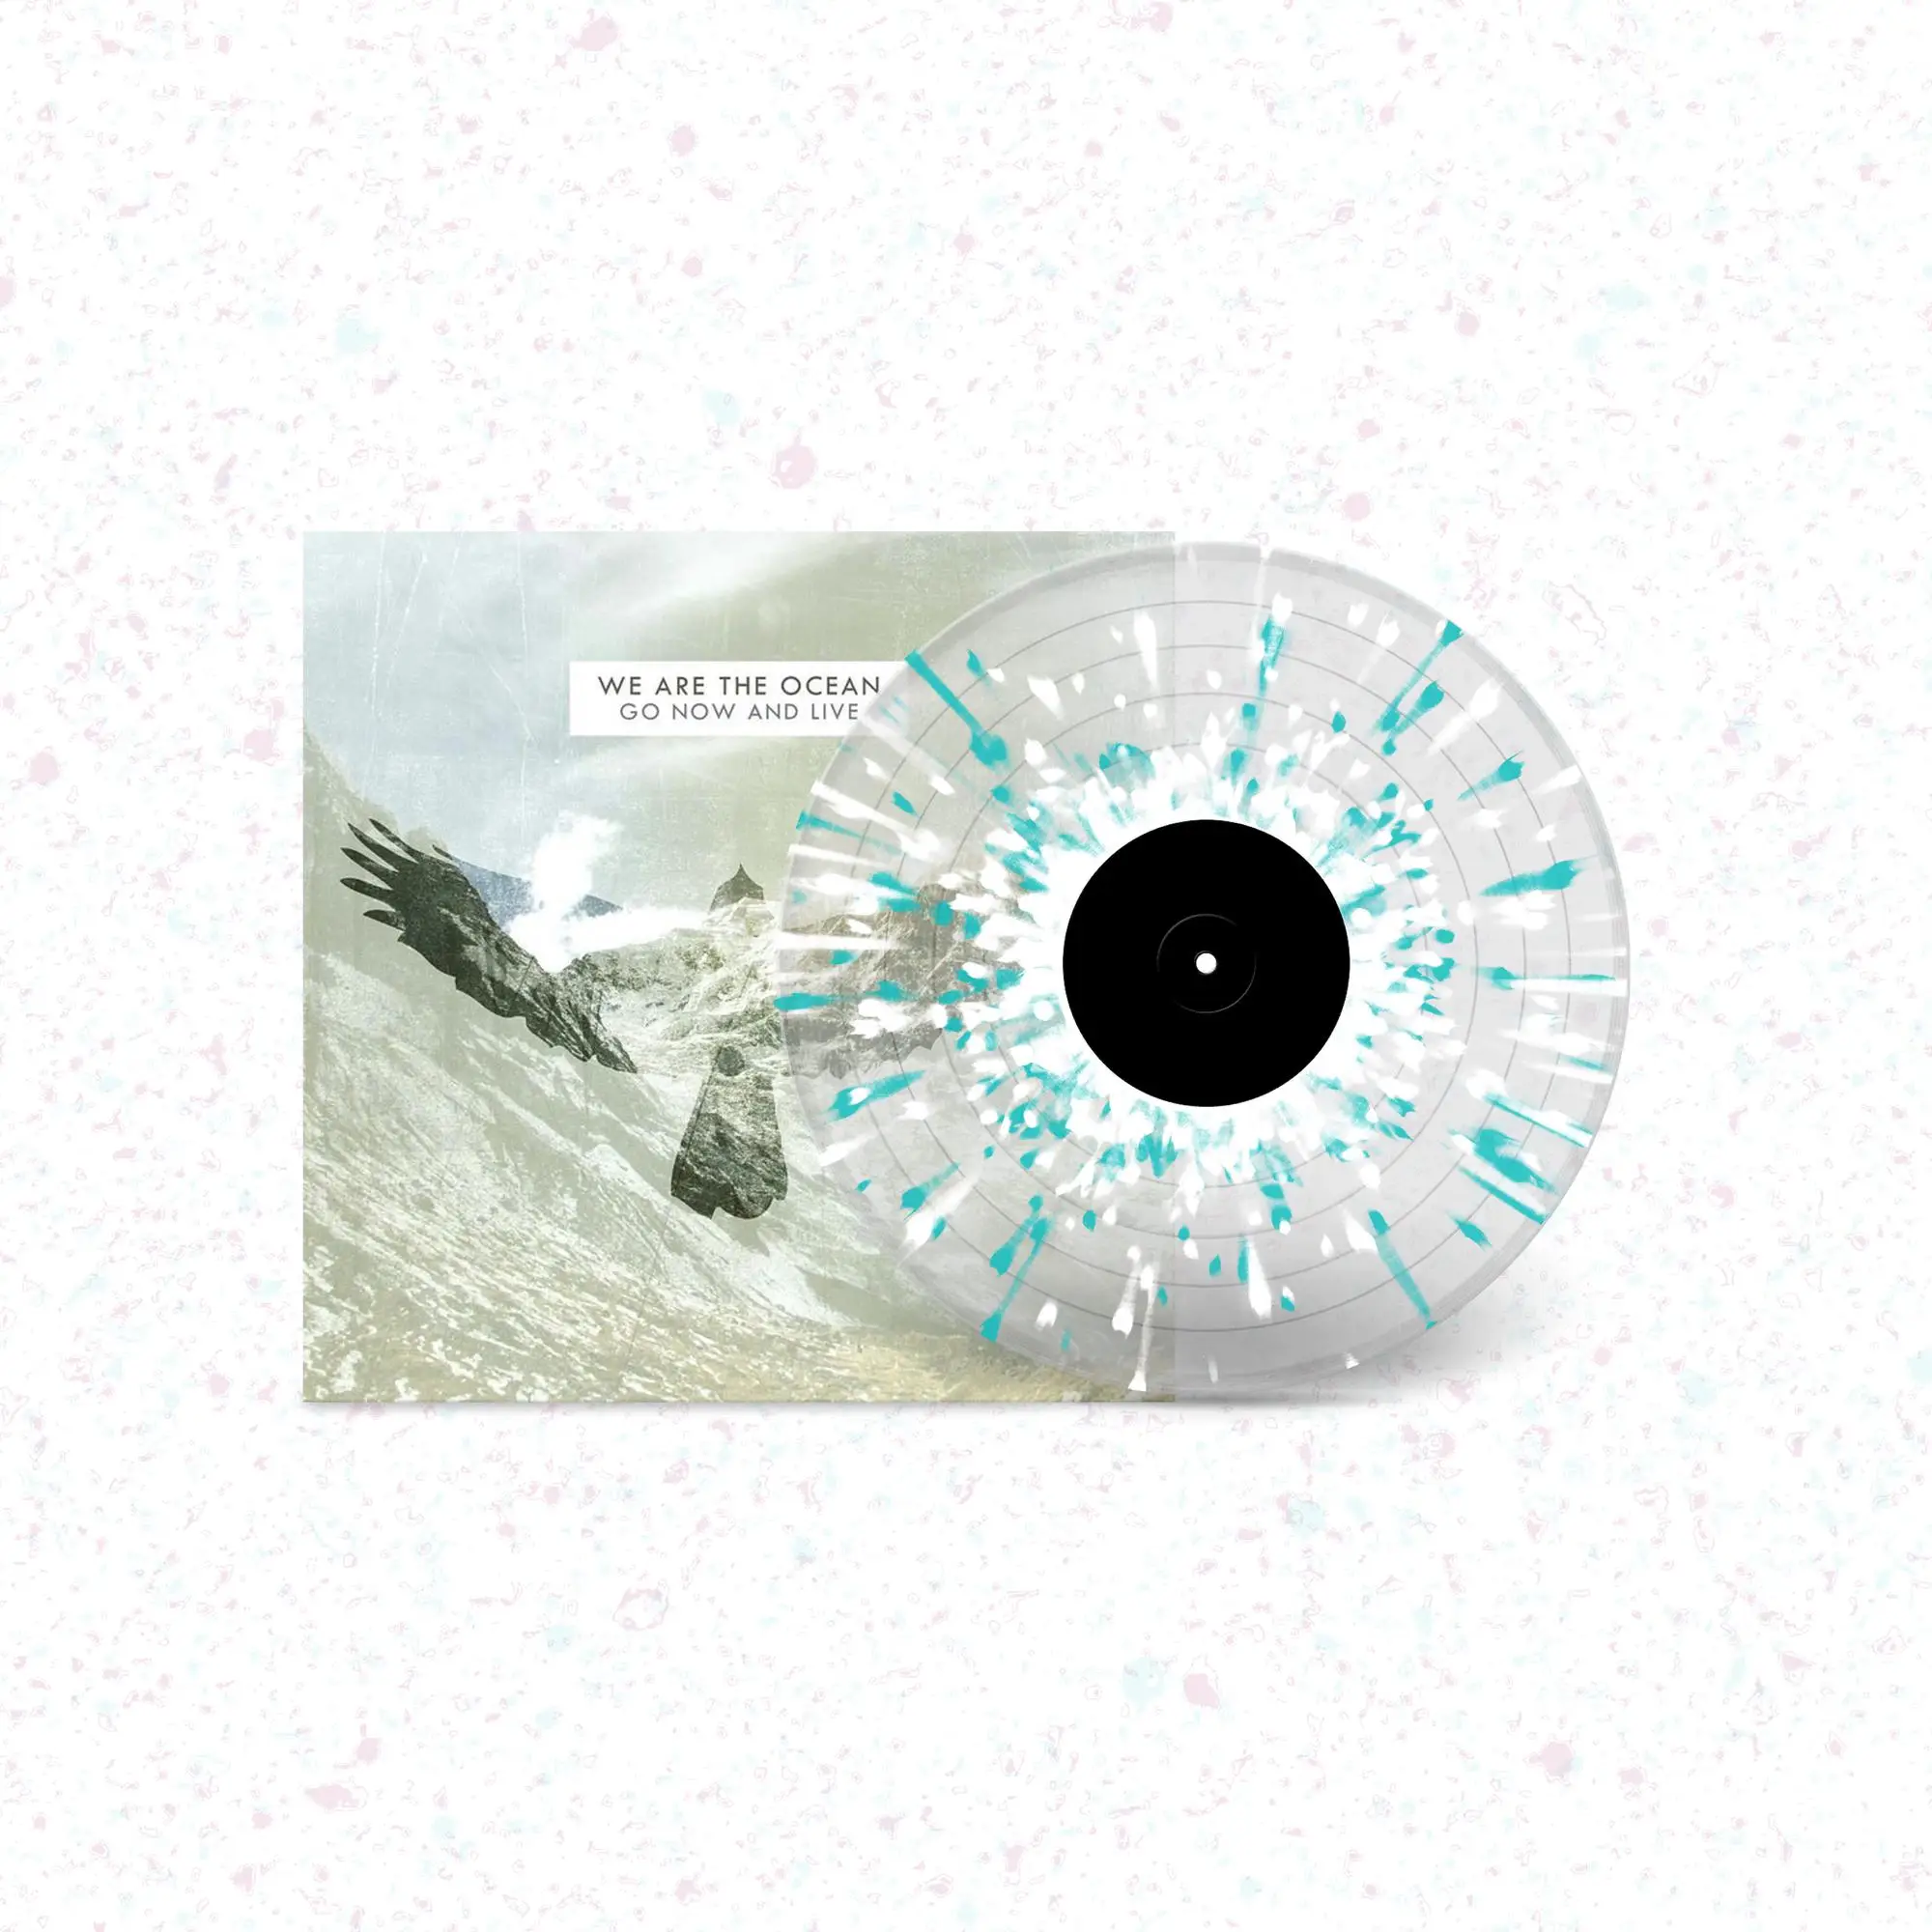 <strong>We Are The Ocean - Go Now and Live (10th Anniversary Vinyl Pressing)</strong> (Vinyl LP - turquoise)